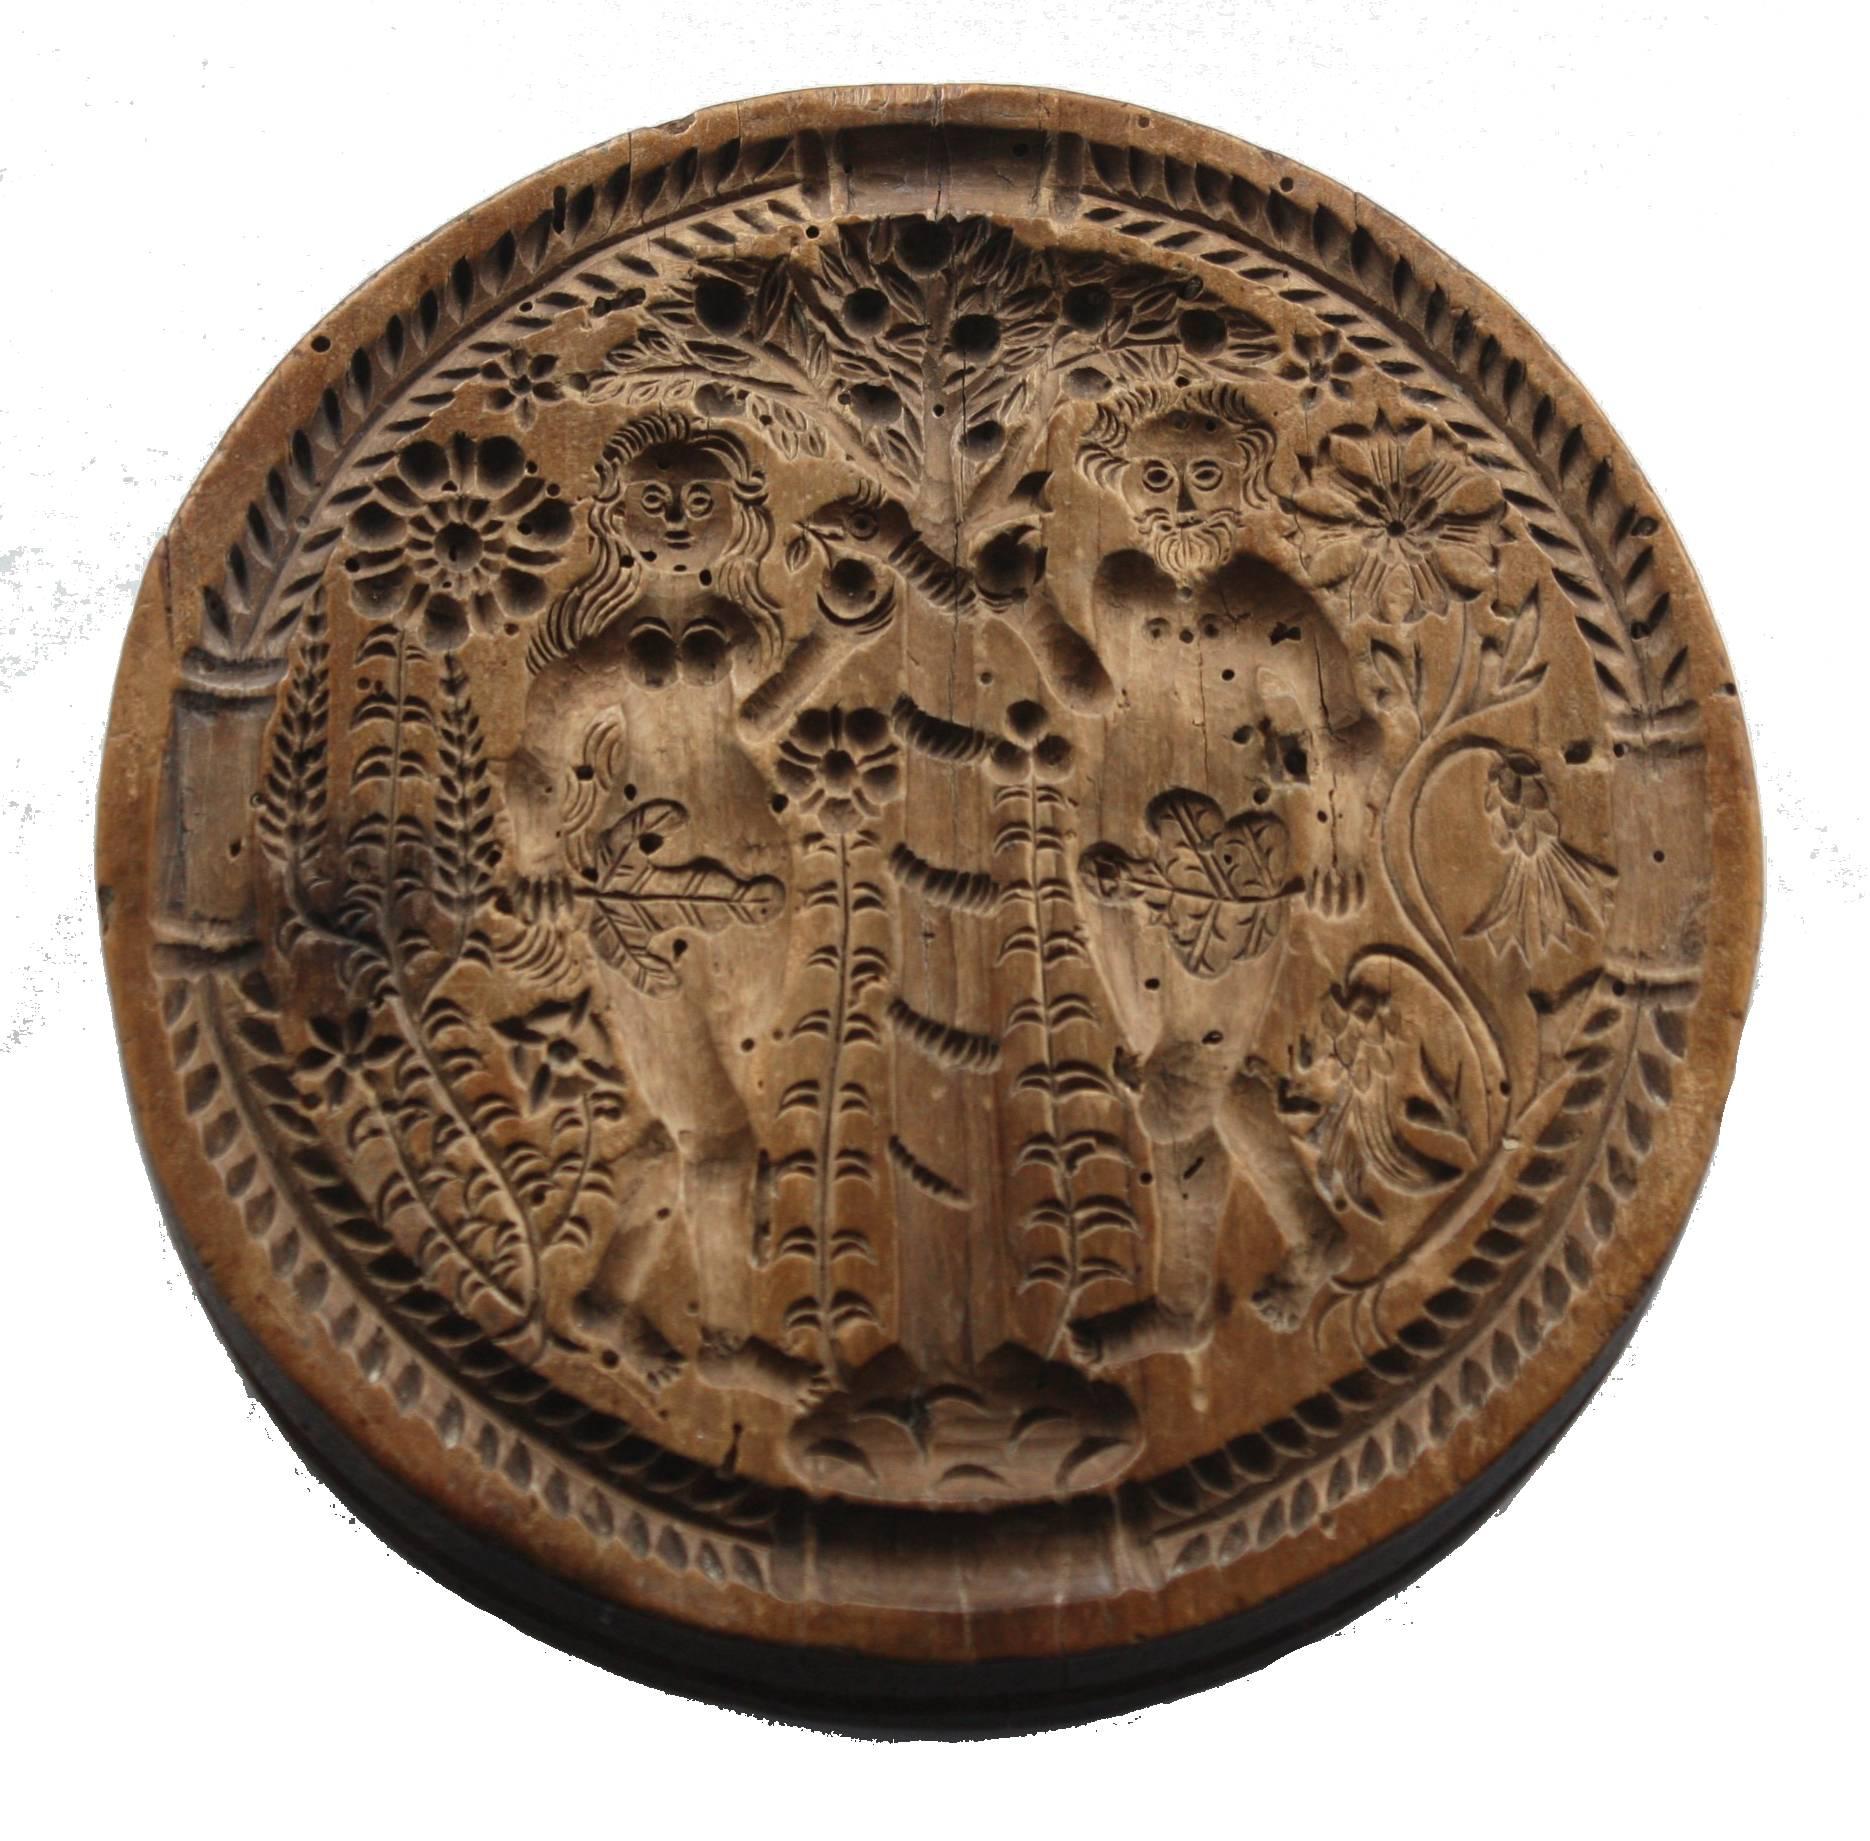 A double-sided Springerle or shortbread cookie mold / press, different religious design each side, Adam and Eve with the serpent in the Garden and Jonah and the Whale,

the main photo depicts both sides of the same double-sided mold.

Germany or